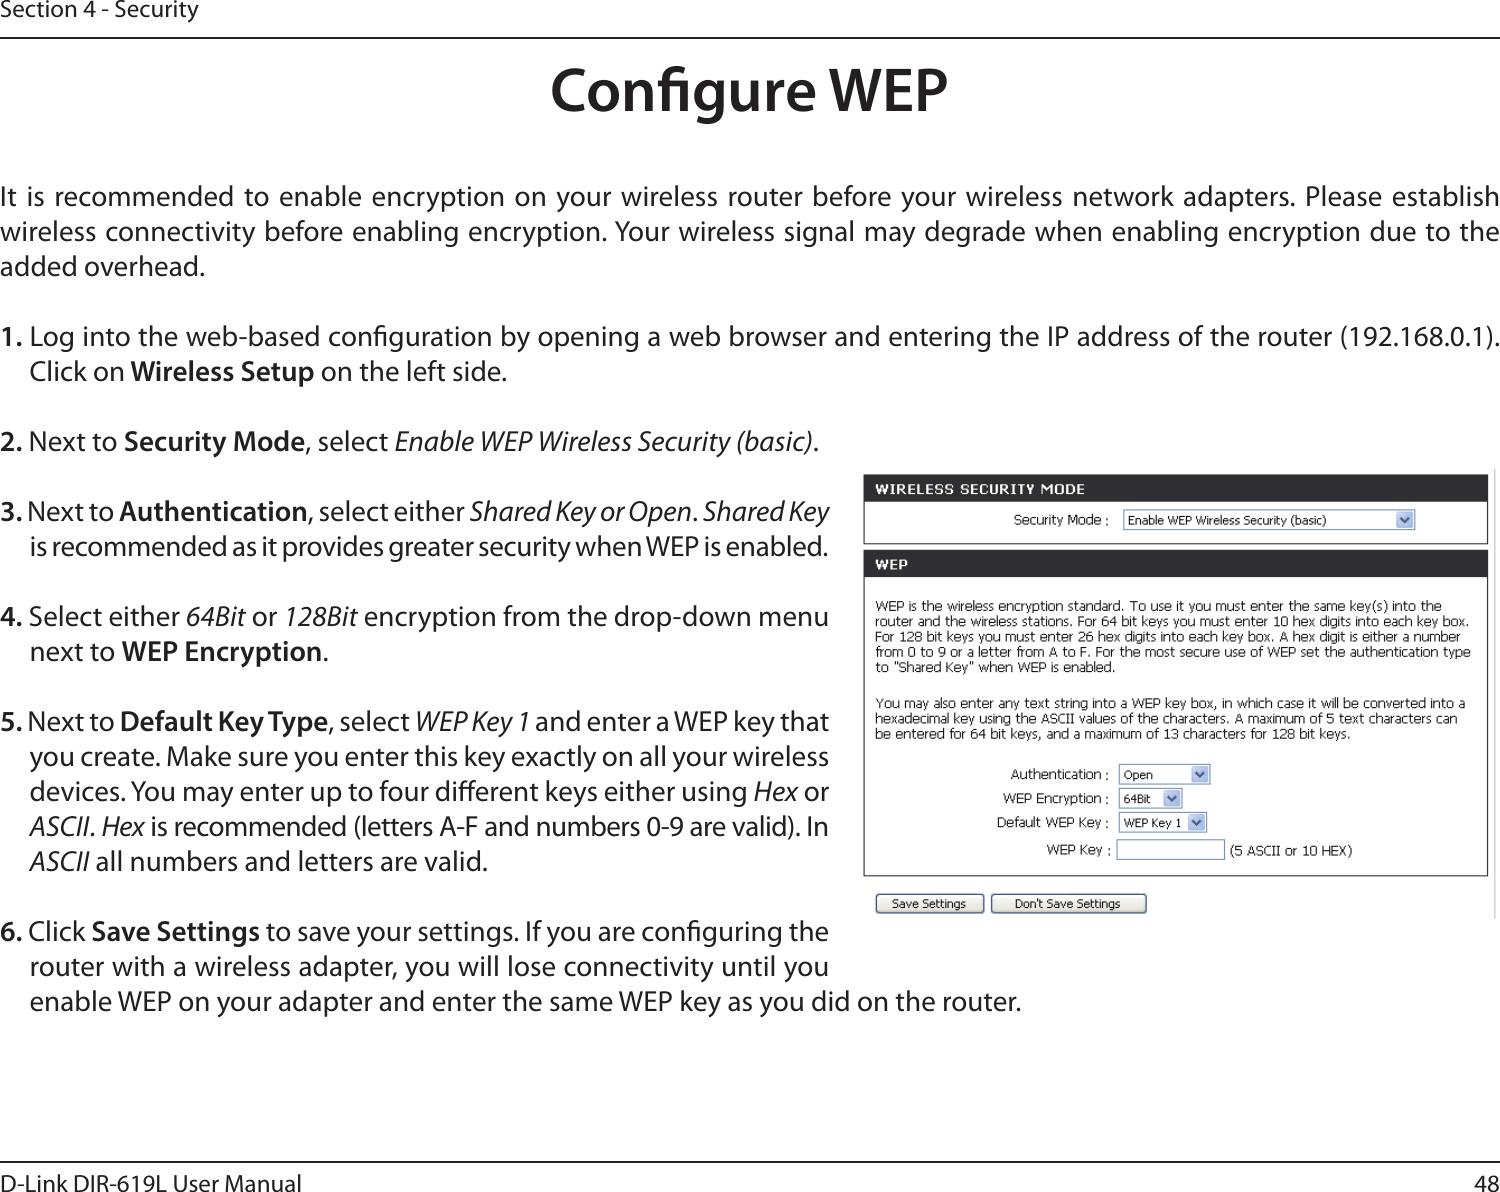 48D-Link DIR-619L User ManualSection 4 - SecurityCongure WEPIt  is recommended to enable encryption on your wireless router before your wireless network adapters.  Please establish wireless connectivity before enabling encryption. Your wireless signal may degrade when enabling encryption due to the added overhead.1. Log into the web-based conguration by opening a web browser and entering the IP address of the router (192.168.0.1).  Click on Wireless Setup on the left side.2. Next to Security Mode, select Enable WEP Wireless Security (basic).3. Next to Authentication, select either Shared Key or Open. Shared Key is recommended as it provides greater security when WEP is enabled.4. Select either 64Bit or 128Bit encryption from the drop-down menu next to WEP Encryption. 5. Next to Default Key Type, select WEP Key 1 and enter a WEP key that you create. Make sure you enter this key exactly on all your wireless devices. You may enter up to four dierent keys either using Hex or ASCII. Hex is recommended (letters A-F and numbers 0-9 are valid). In ASCII all numbers and letters are valid.6. Click Save Settings to save your settings. If you are conguring the router with a wireless adapter, you will lose connectivity until you enable WEP on your adapter and enter the same WEP key as you did on the router.